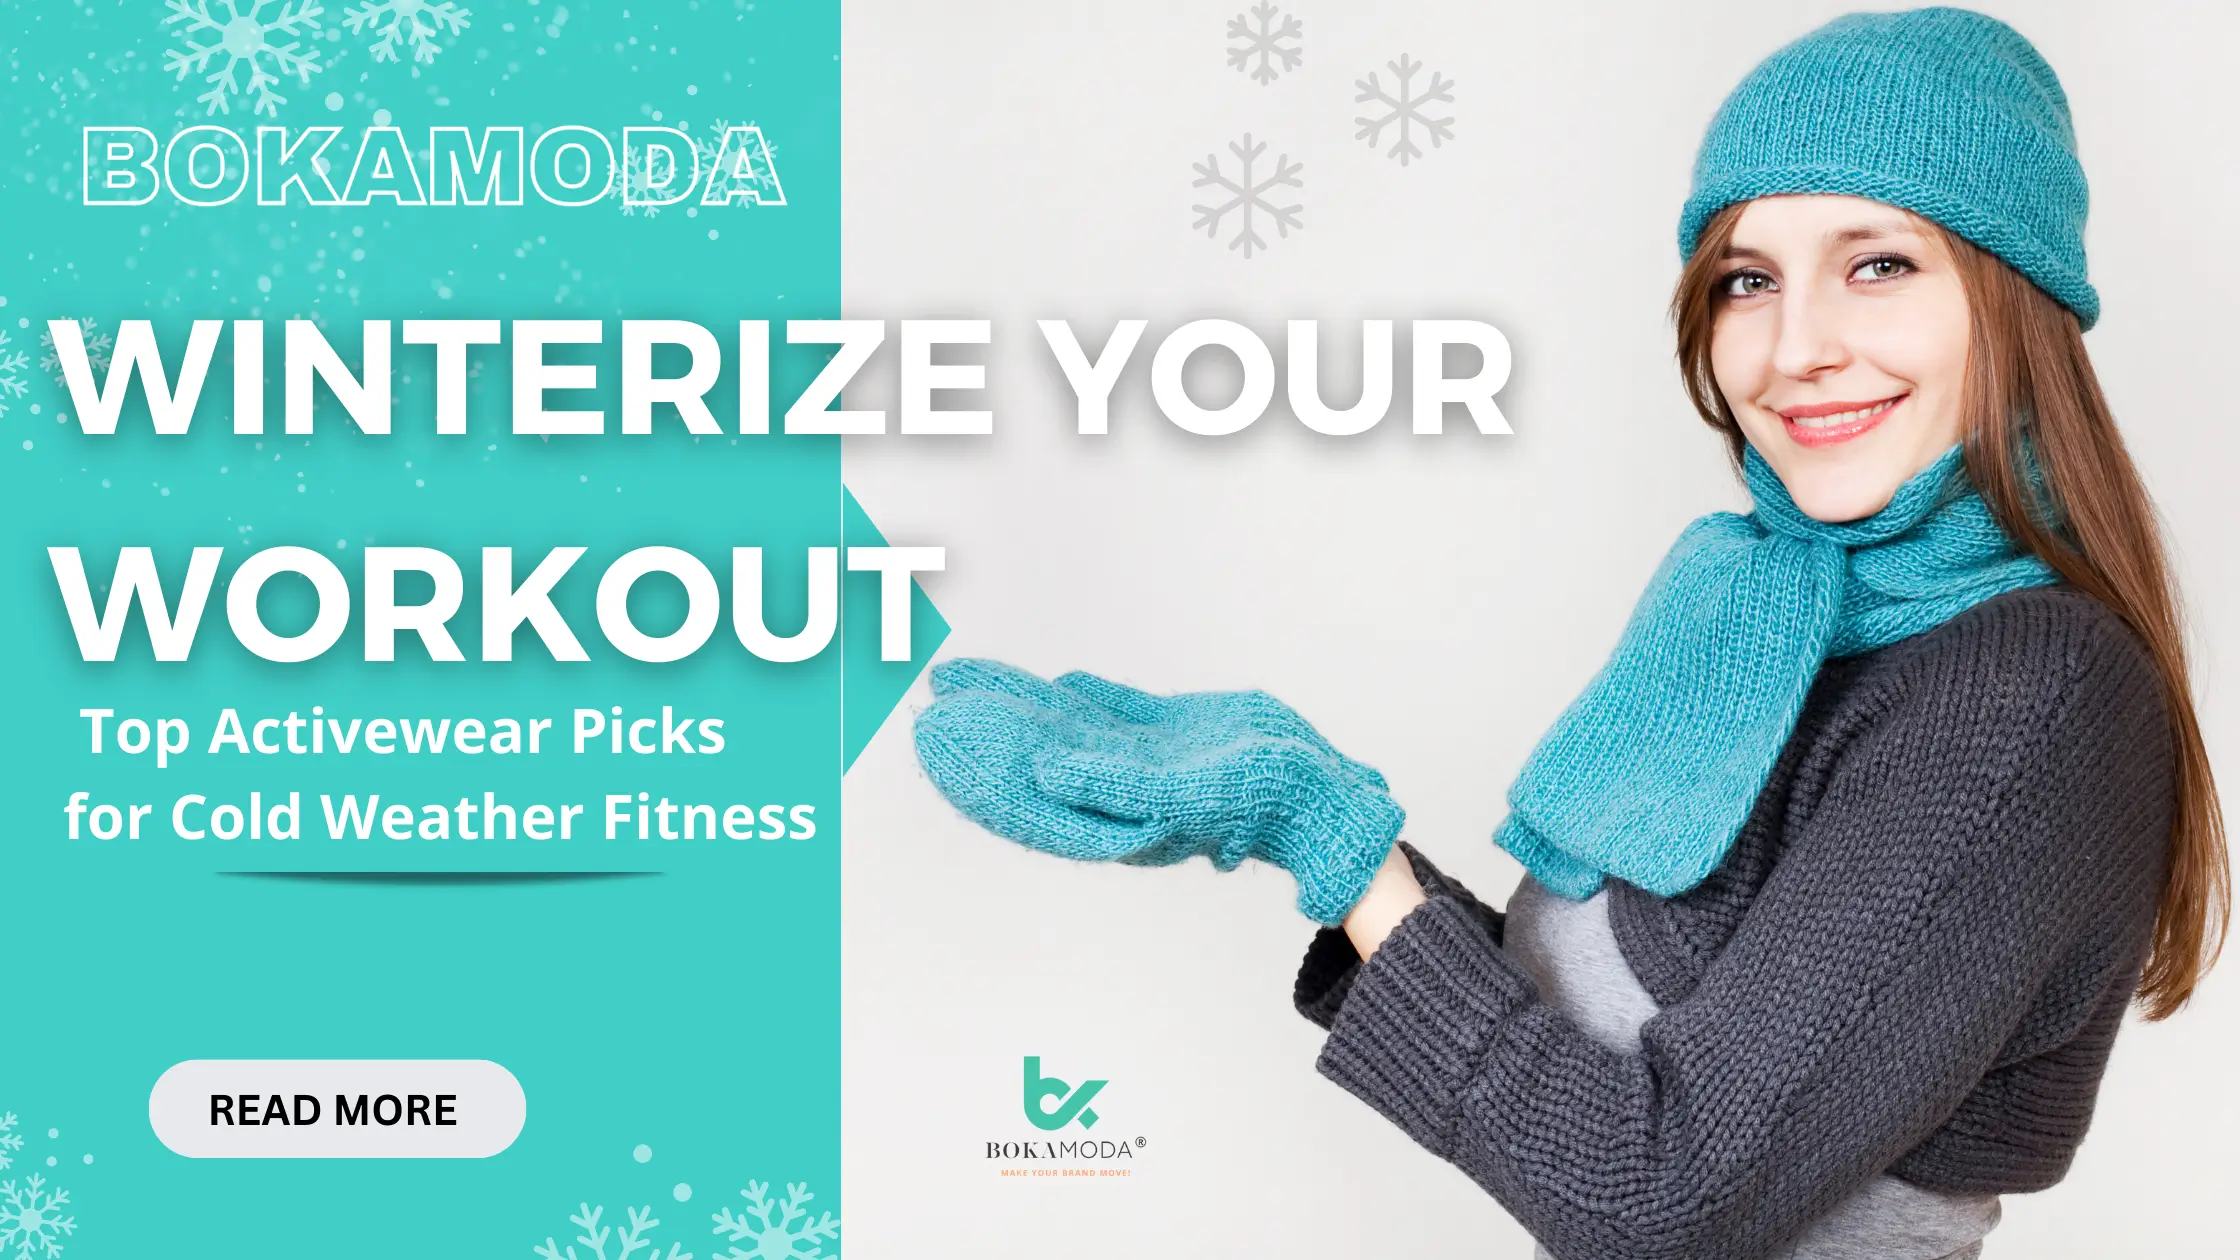 Winterize Your Workout: Top Activewear Picks for Cold Weather Fitness